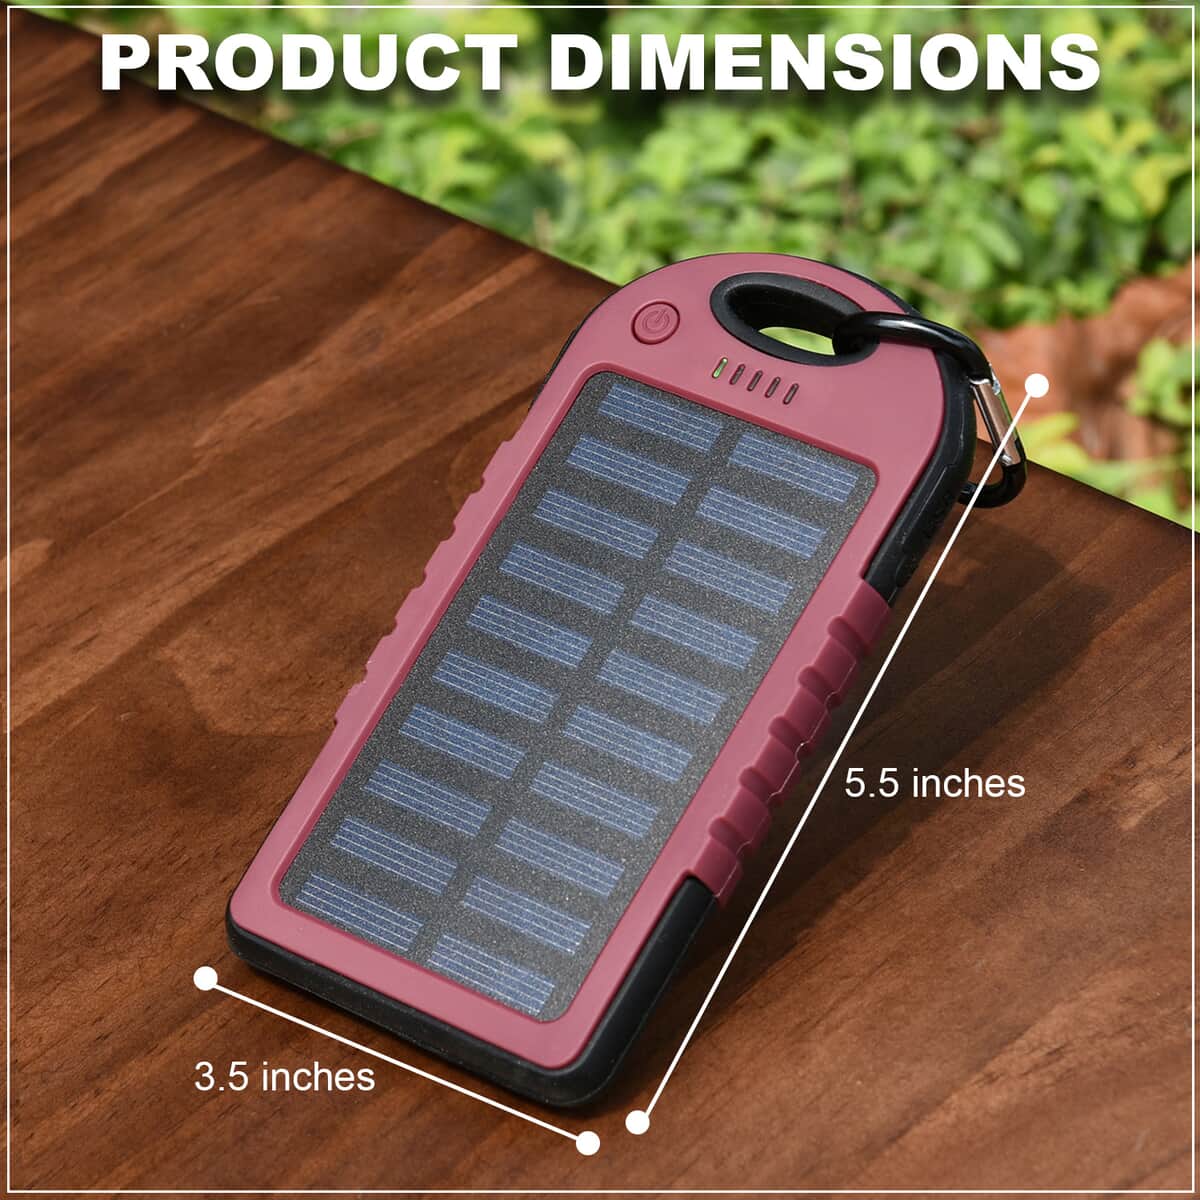 Homesmart Burgundy Carabiner Solar 5000 mAh Battery Charger with USB & Emergency LED Torch image number 3